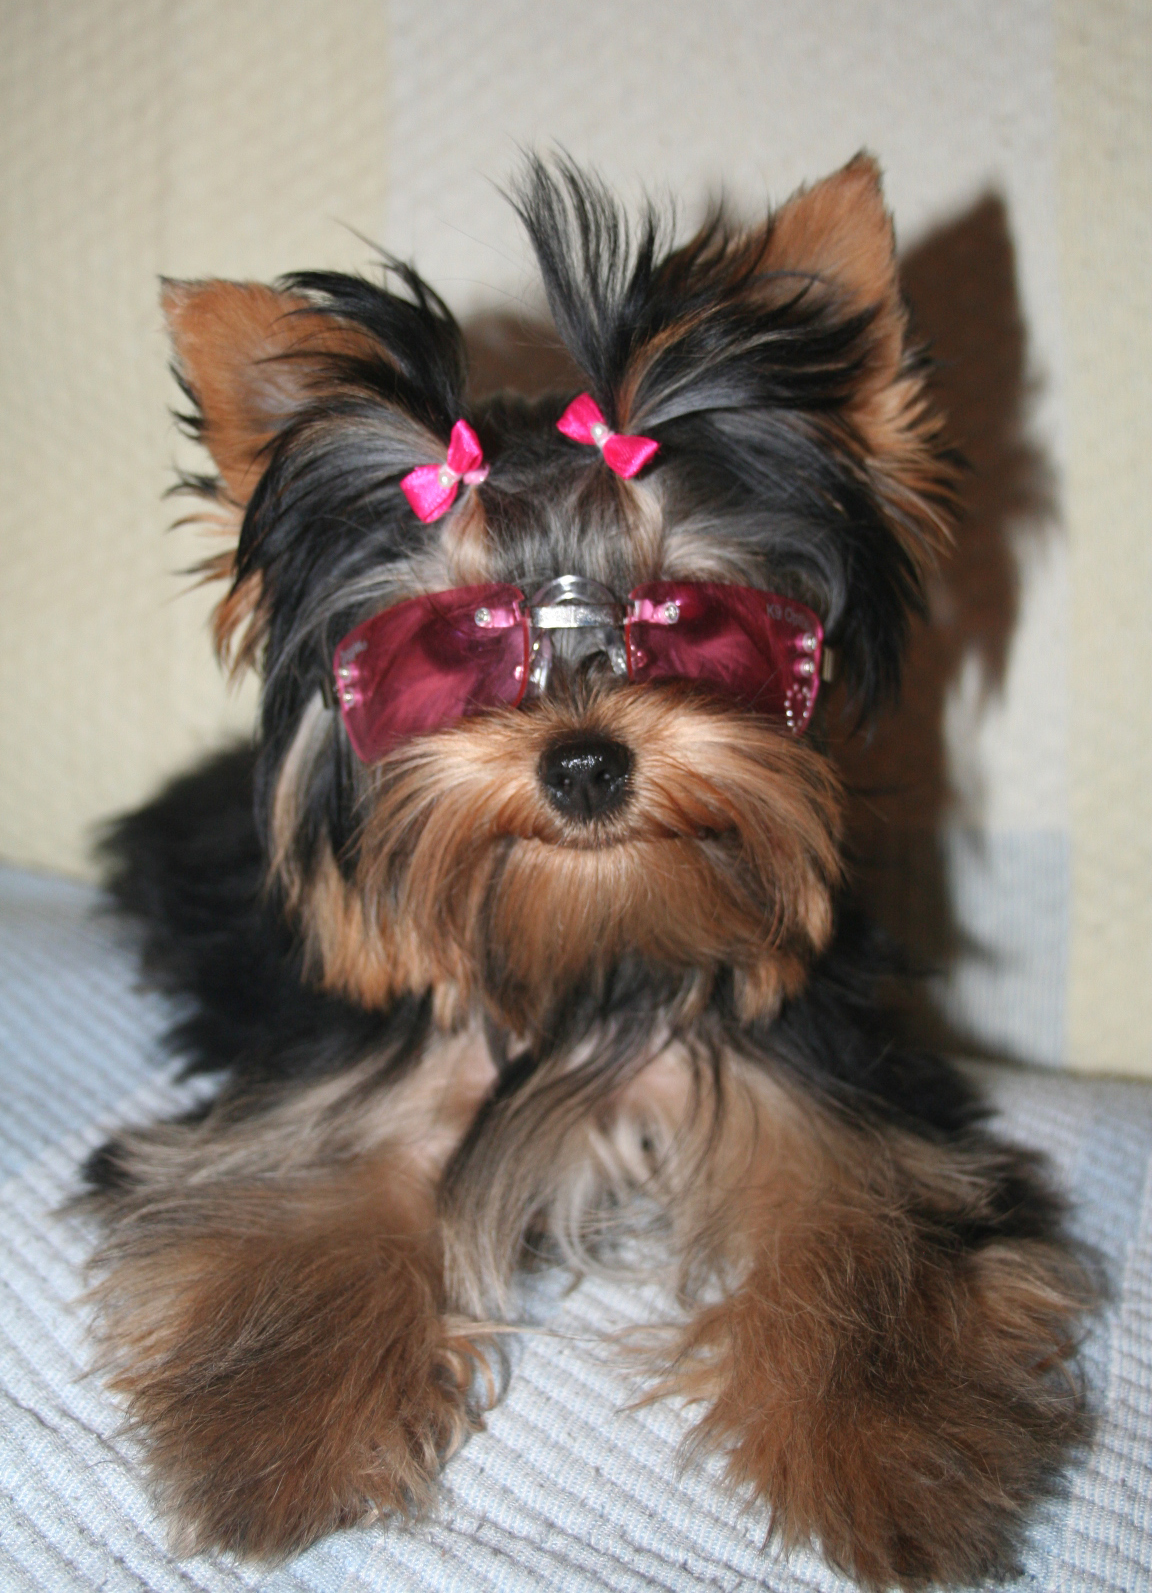 All List Of Different Dogs Breeds: Yorkie Dogs - Small Dog ...